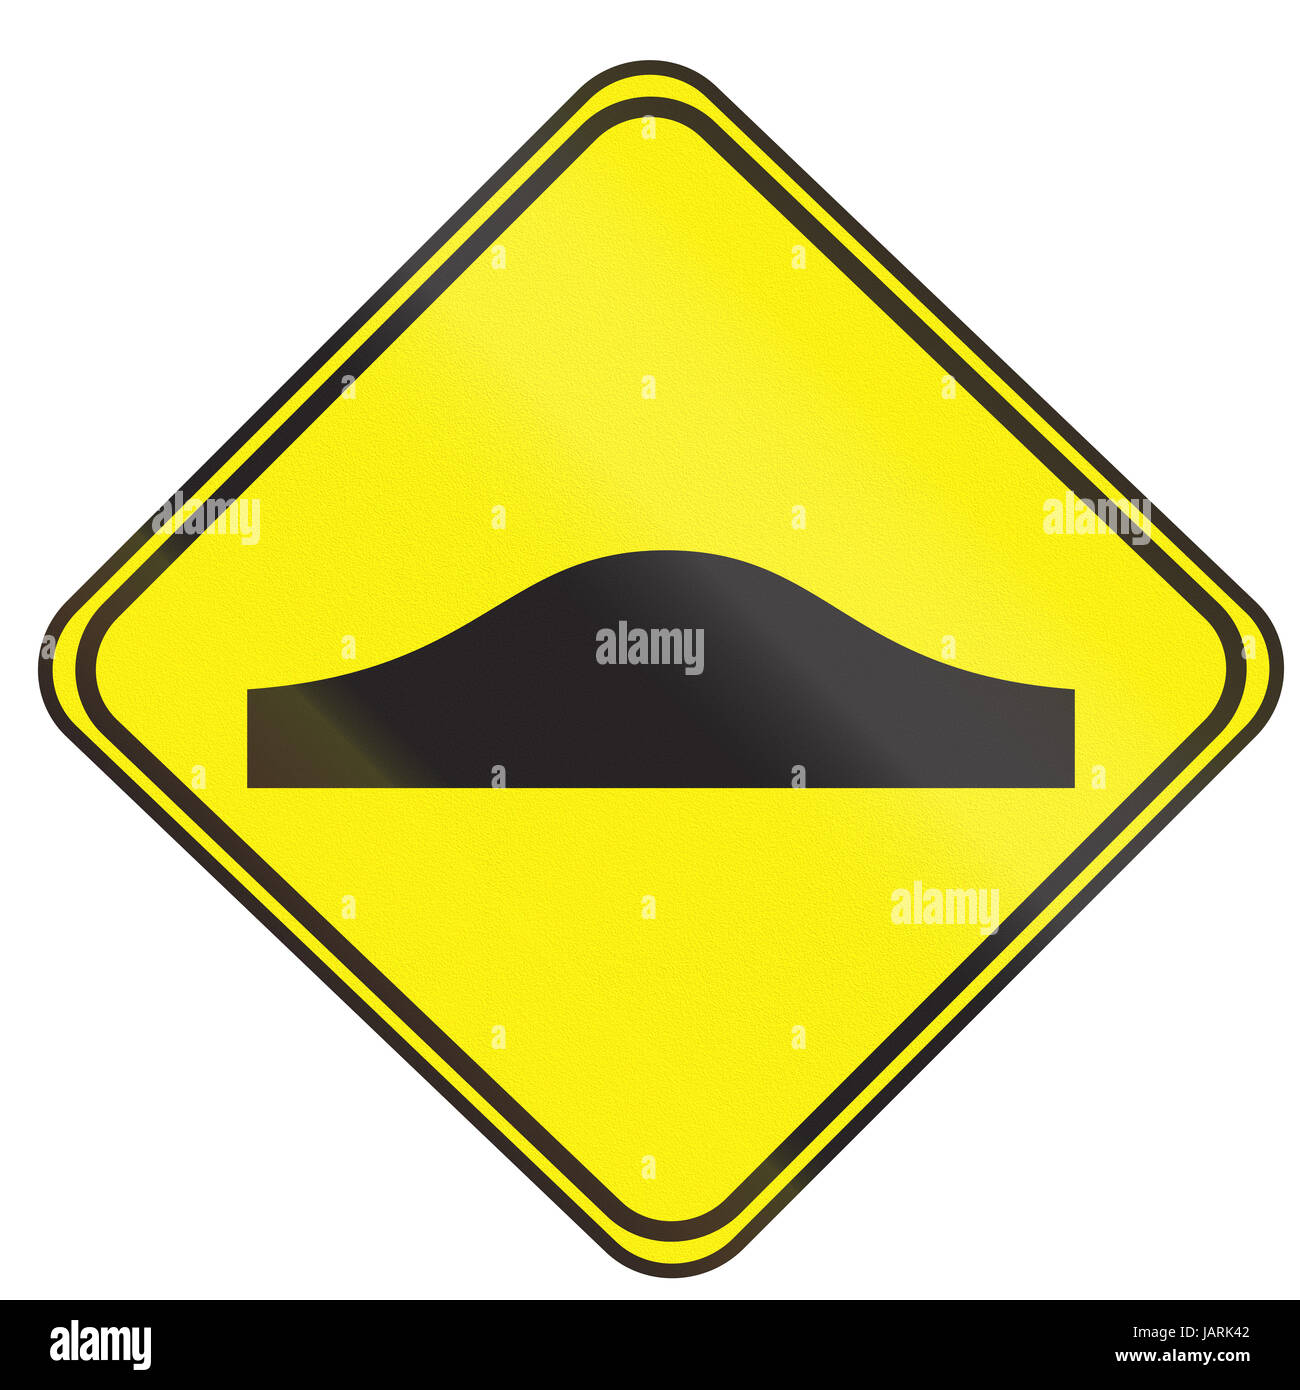 Road sign used in Uruguay - Bumps ahead. Stock Photo